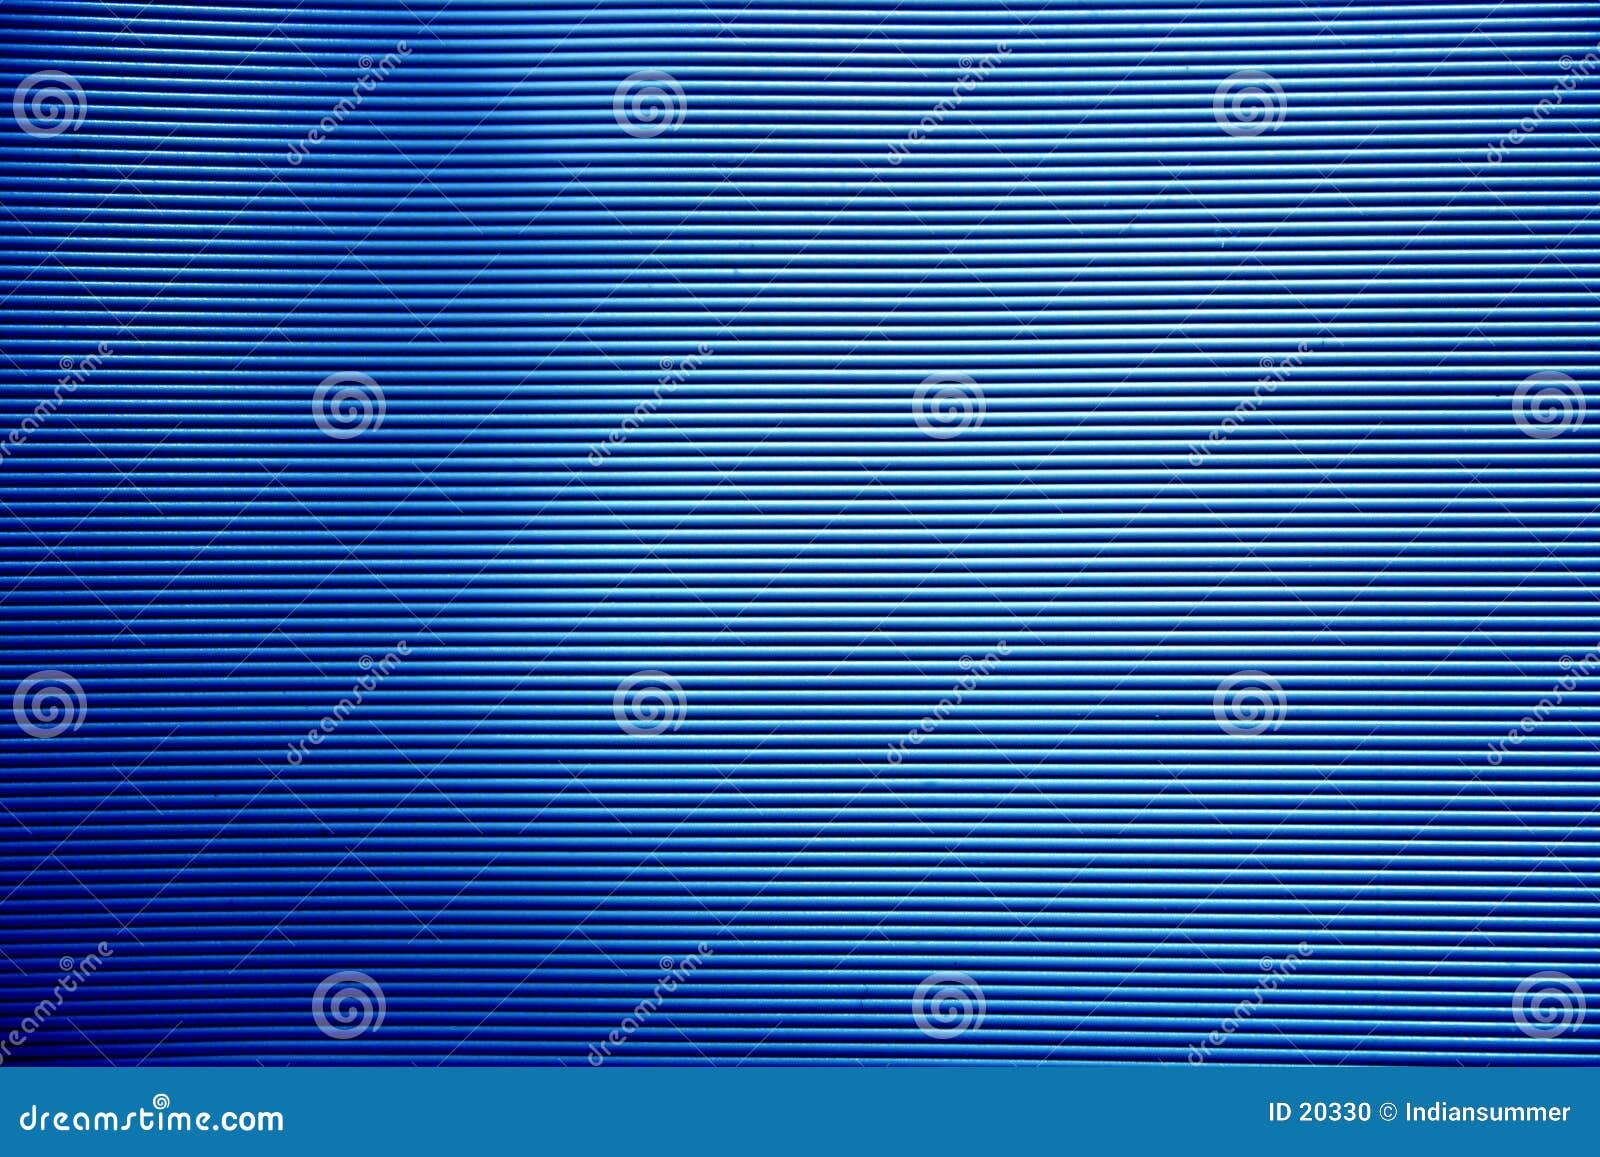 Computer wire texture II stock photo. Image of background - 20330